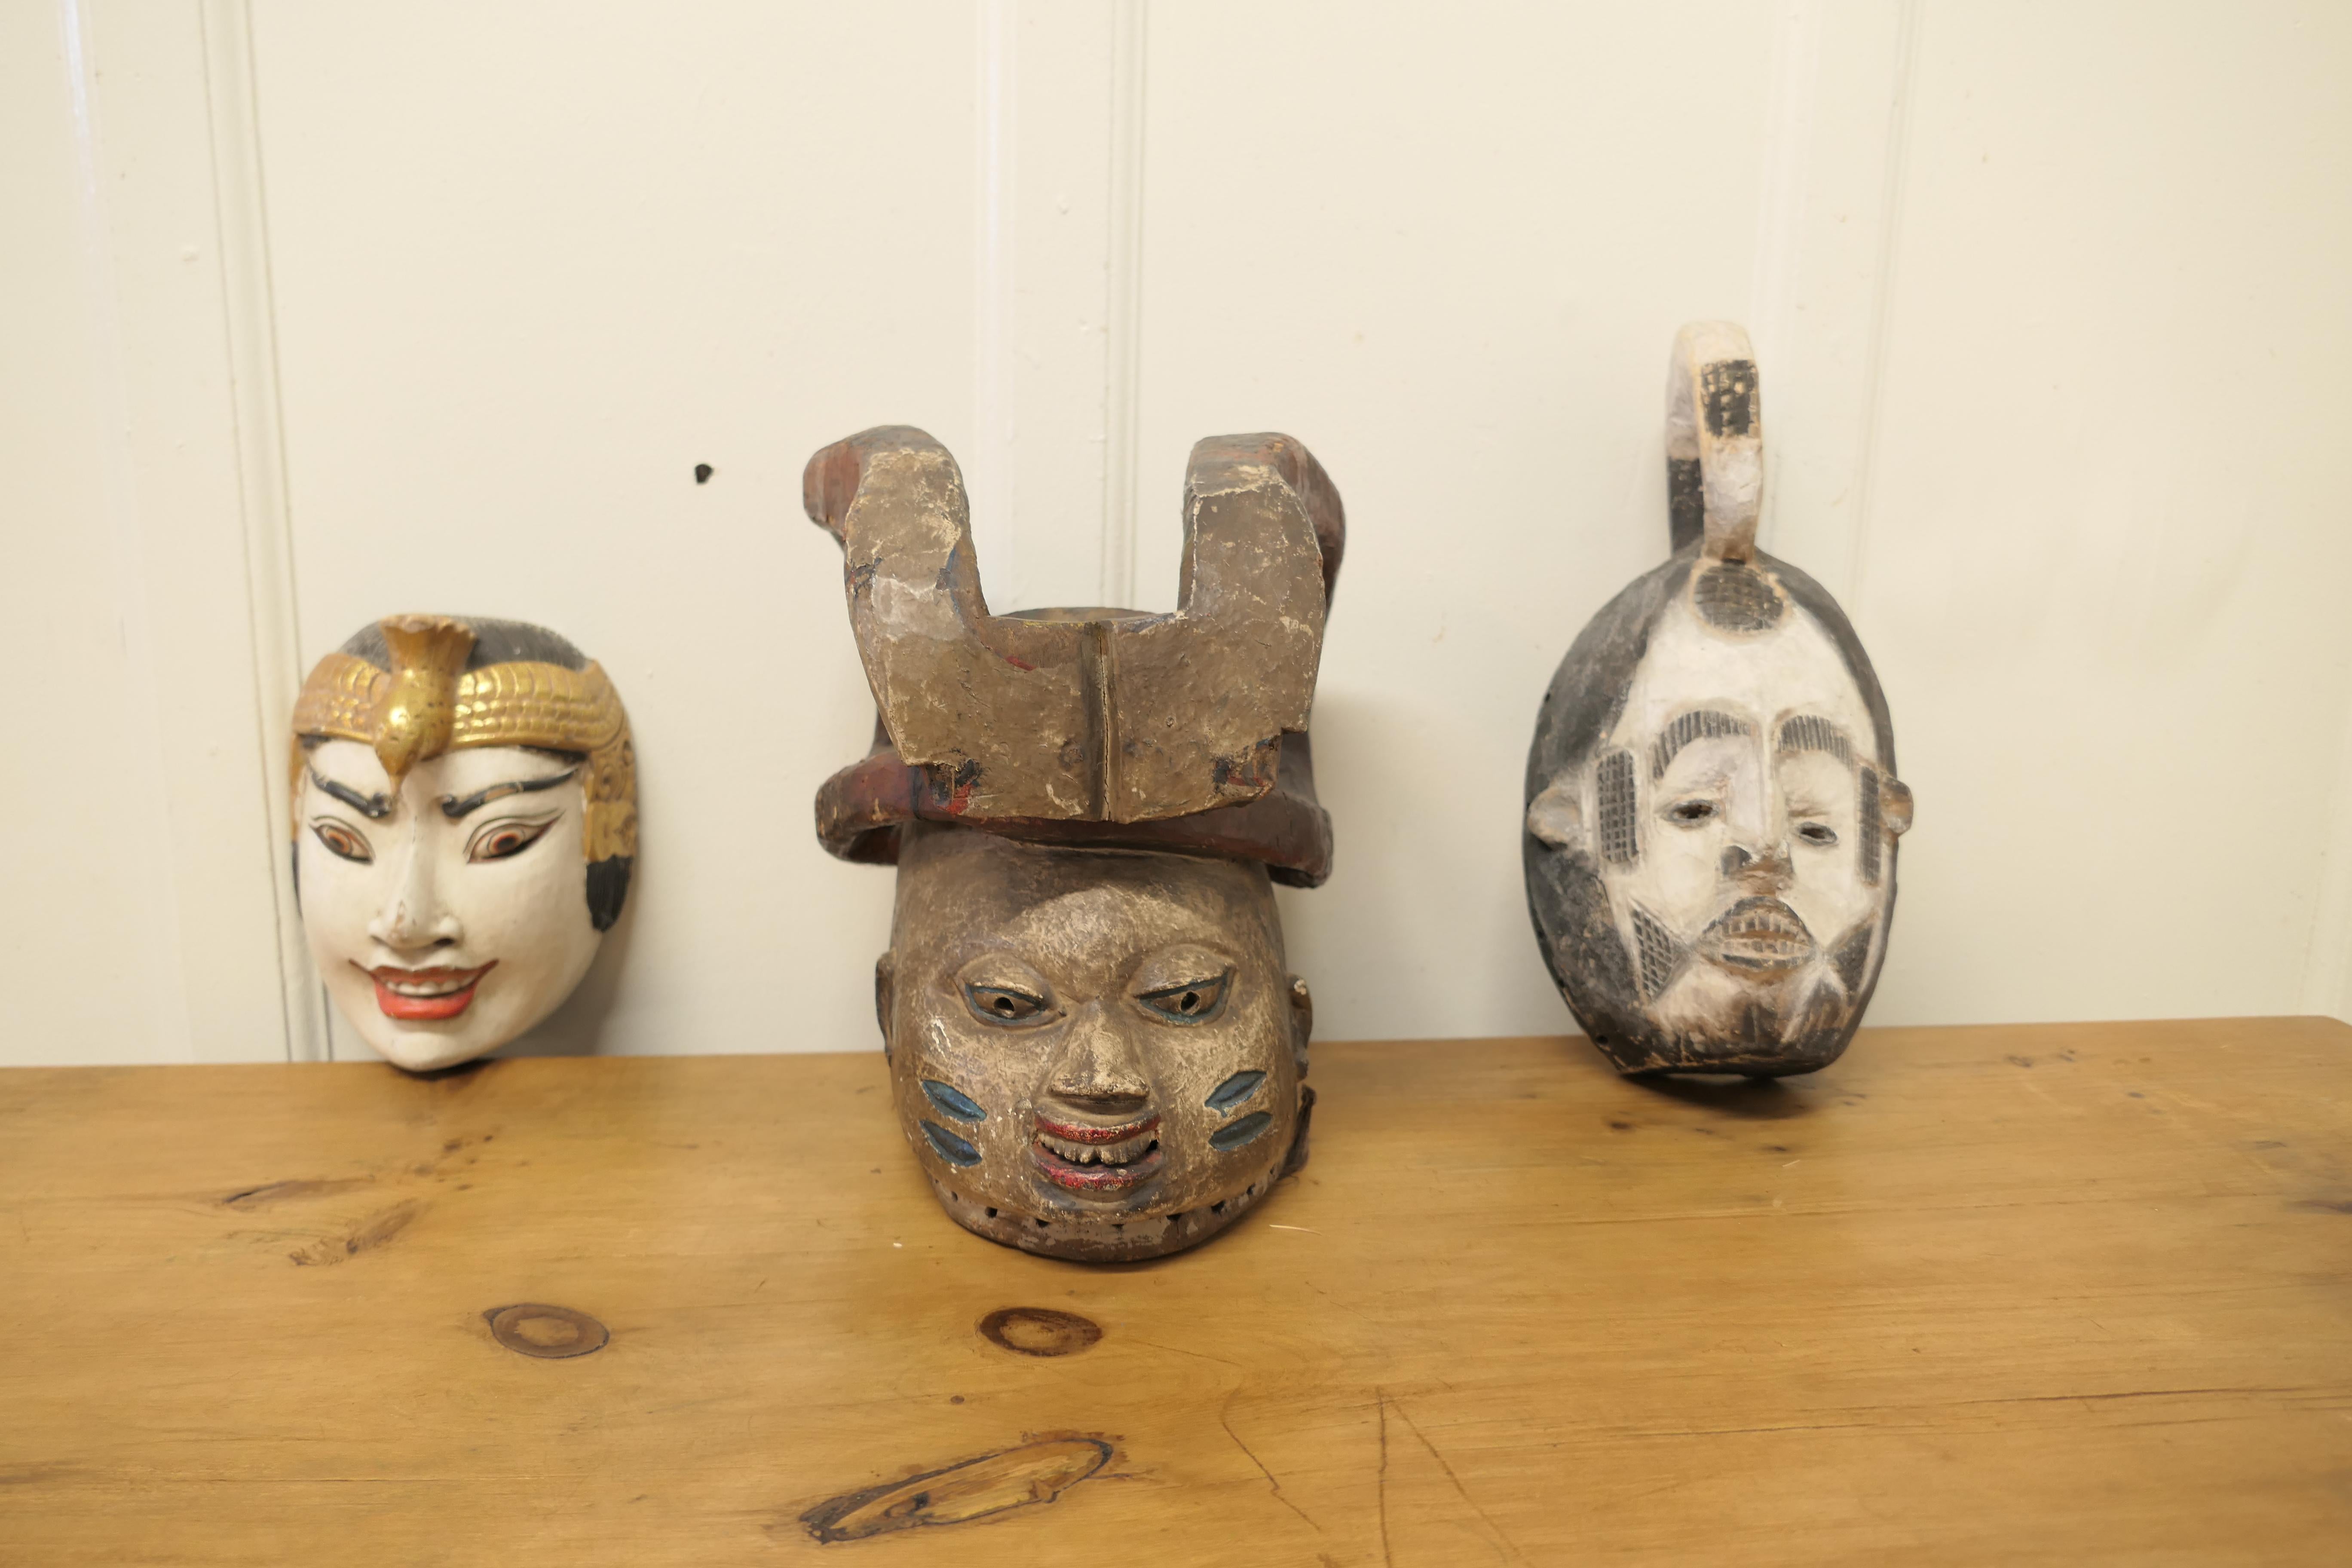 3 carved wooden Ceremonial Masks from Nigeria, Africa and Indonesia

These are unusual pieces, they are all carved in wood and painted
One is a Yorubastam Gelede from Nigeria, it dates from the 19th Century and would have been used in fertility